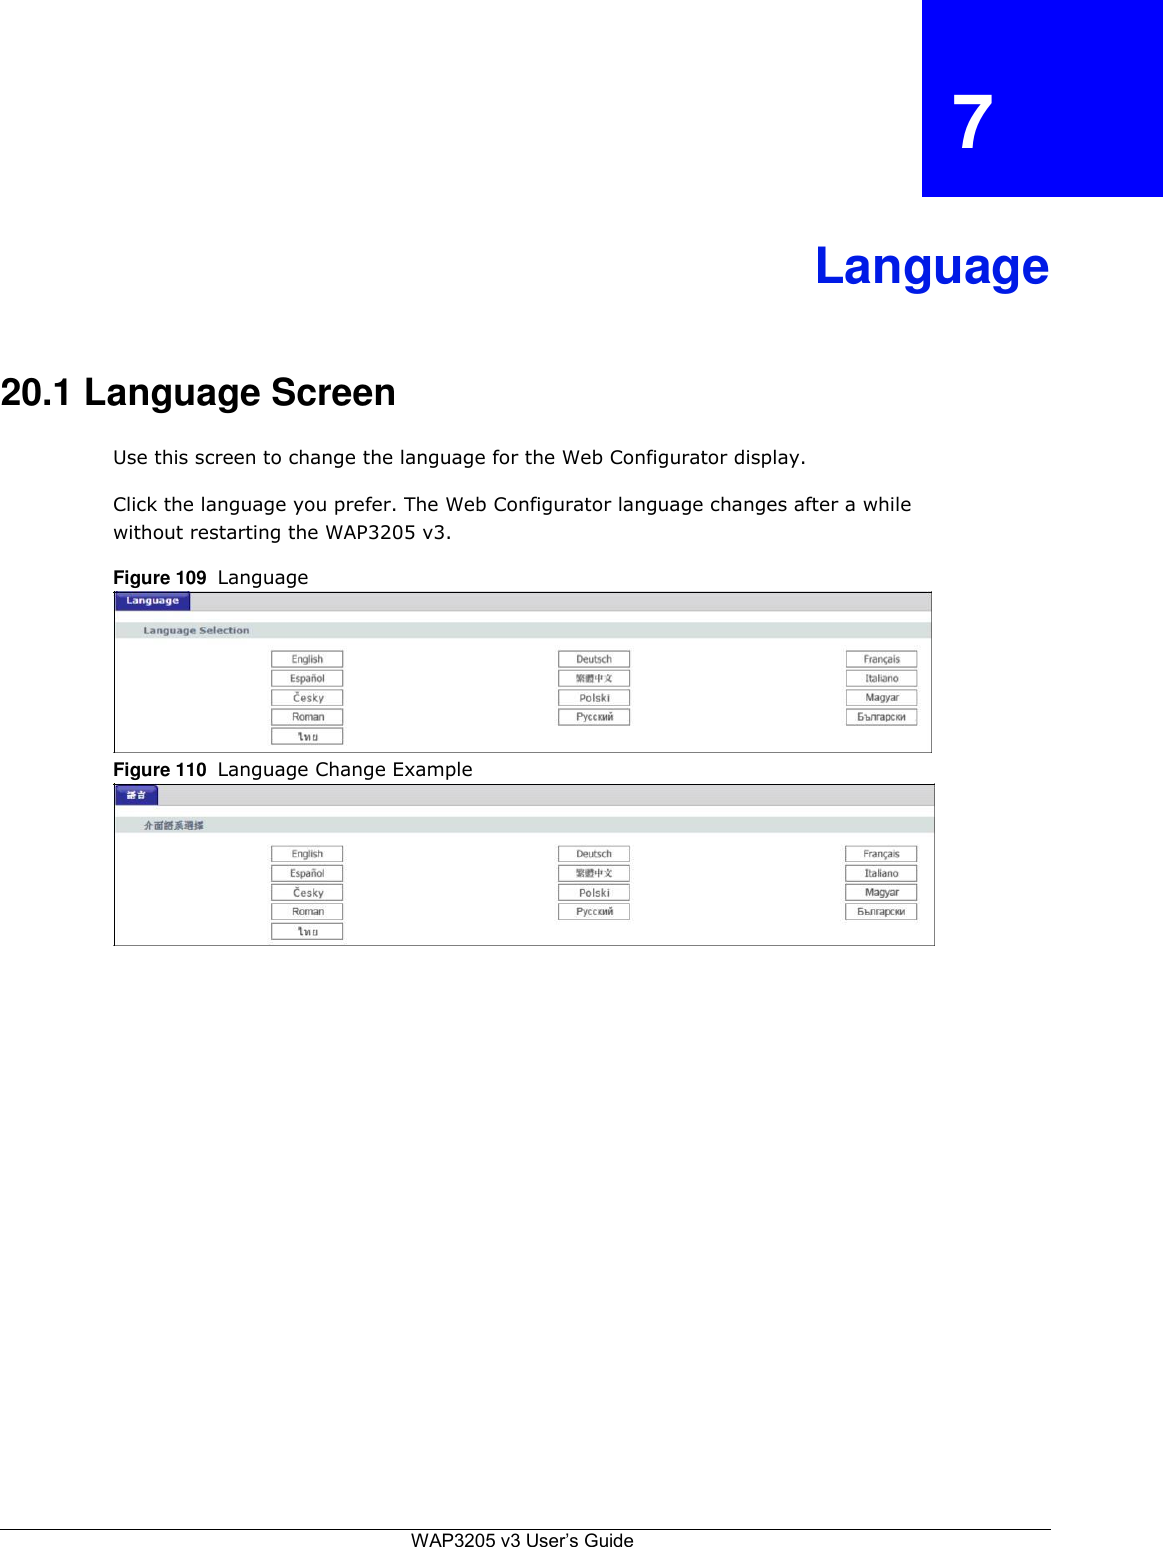  7    Language    20.1 Language Screen  Use this screen to change the language for the Web Configurator display.  Click the language you prefer. The Web Configurator language changes after a while without restarting the WAP3205 v3.  Figure 109  Language         Figure 110  Language Change Example                                    WAP3205 v3 User’s Guide 